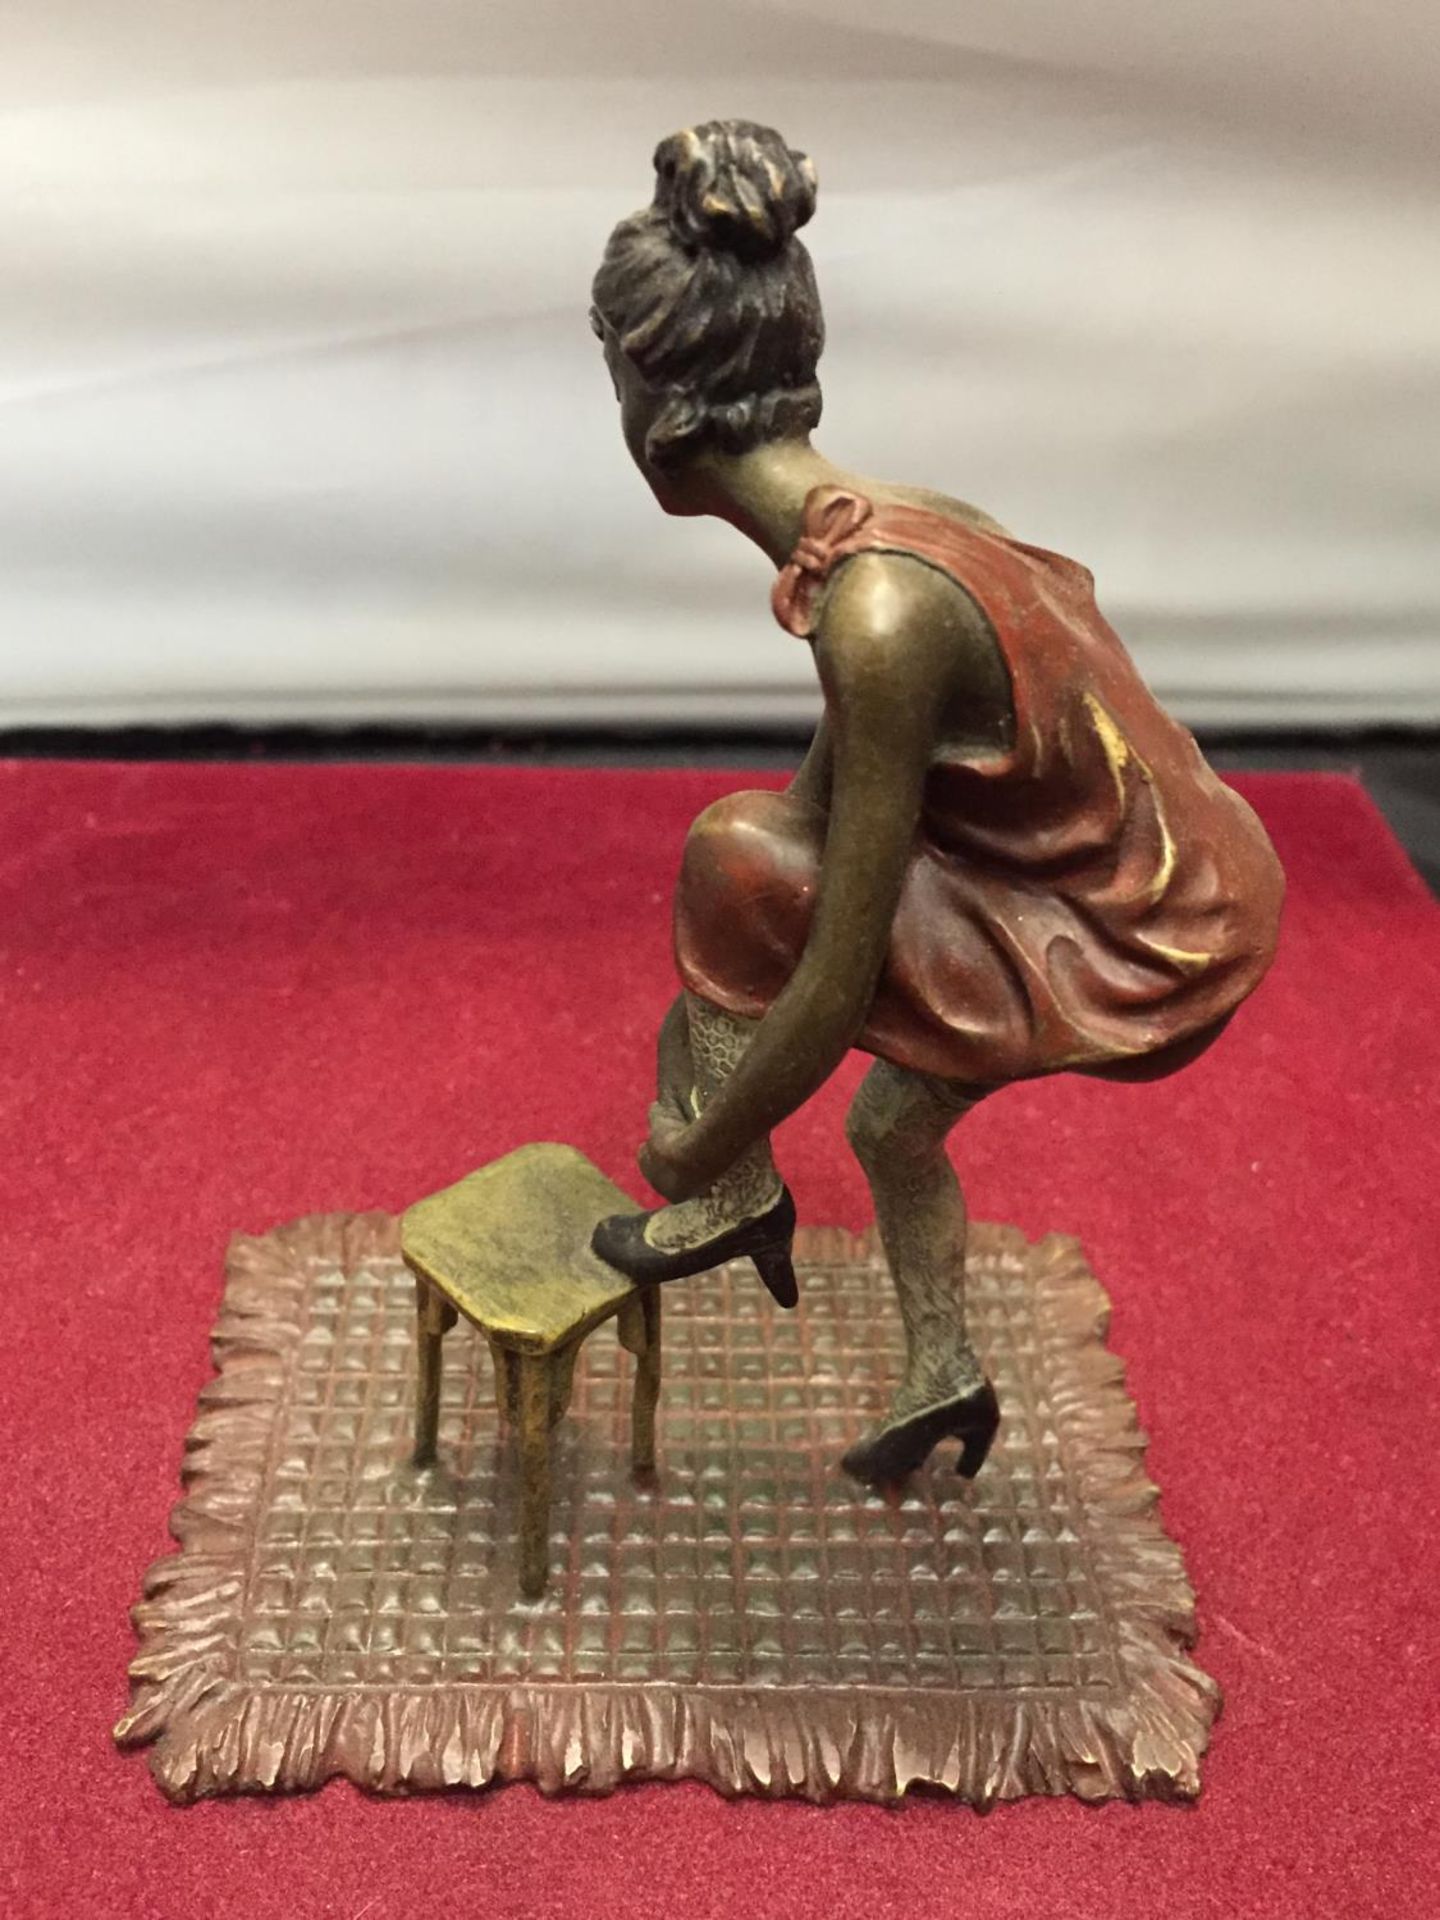 A BERGMAN STYLE COLD PAINTED FIGURINE OF A LADY WITH HER FOOT ON A STOOL HEIGHT APPROXIMATELY 12CM - Image 3 of 5